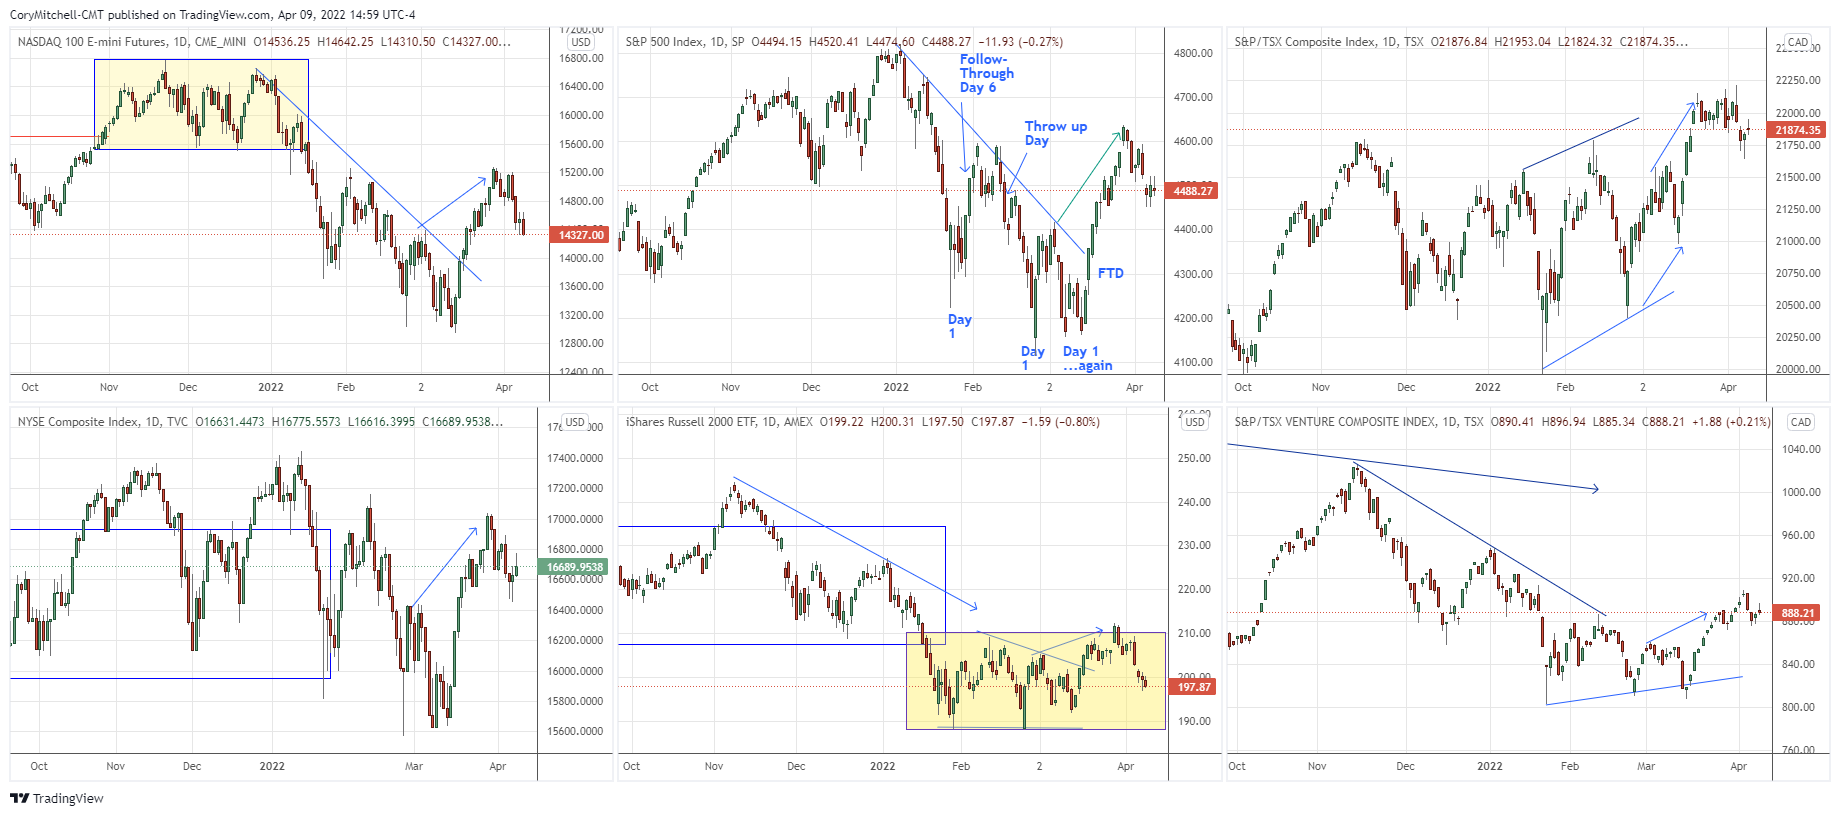 US and Canadian stock indices comparison April 9